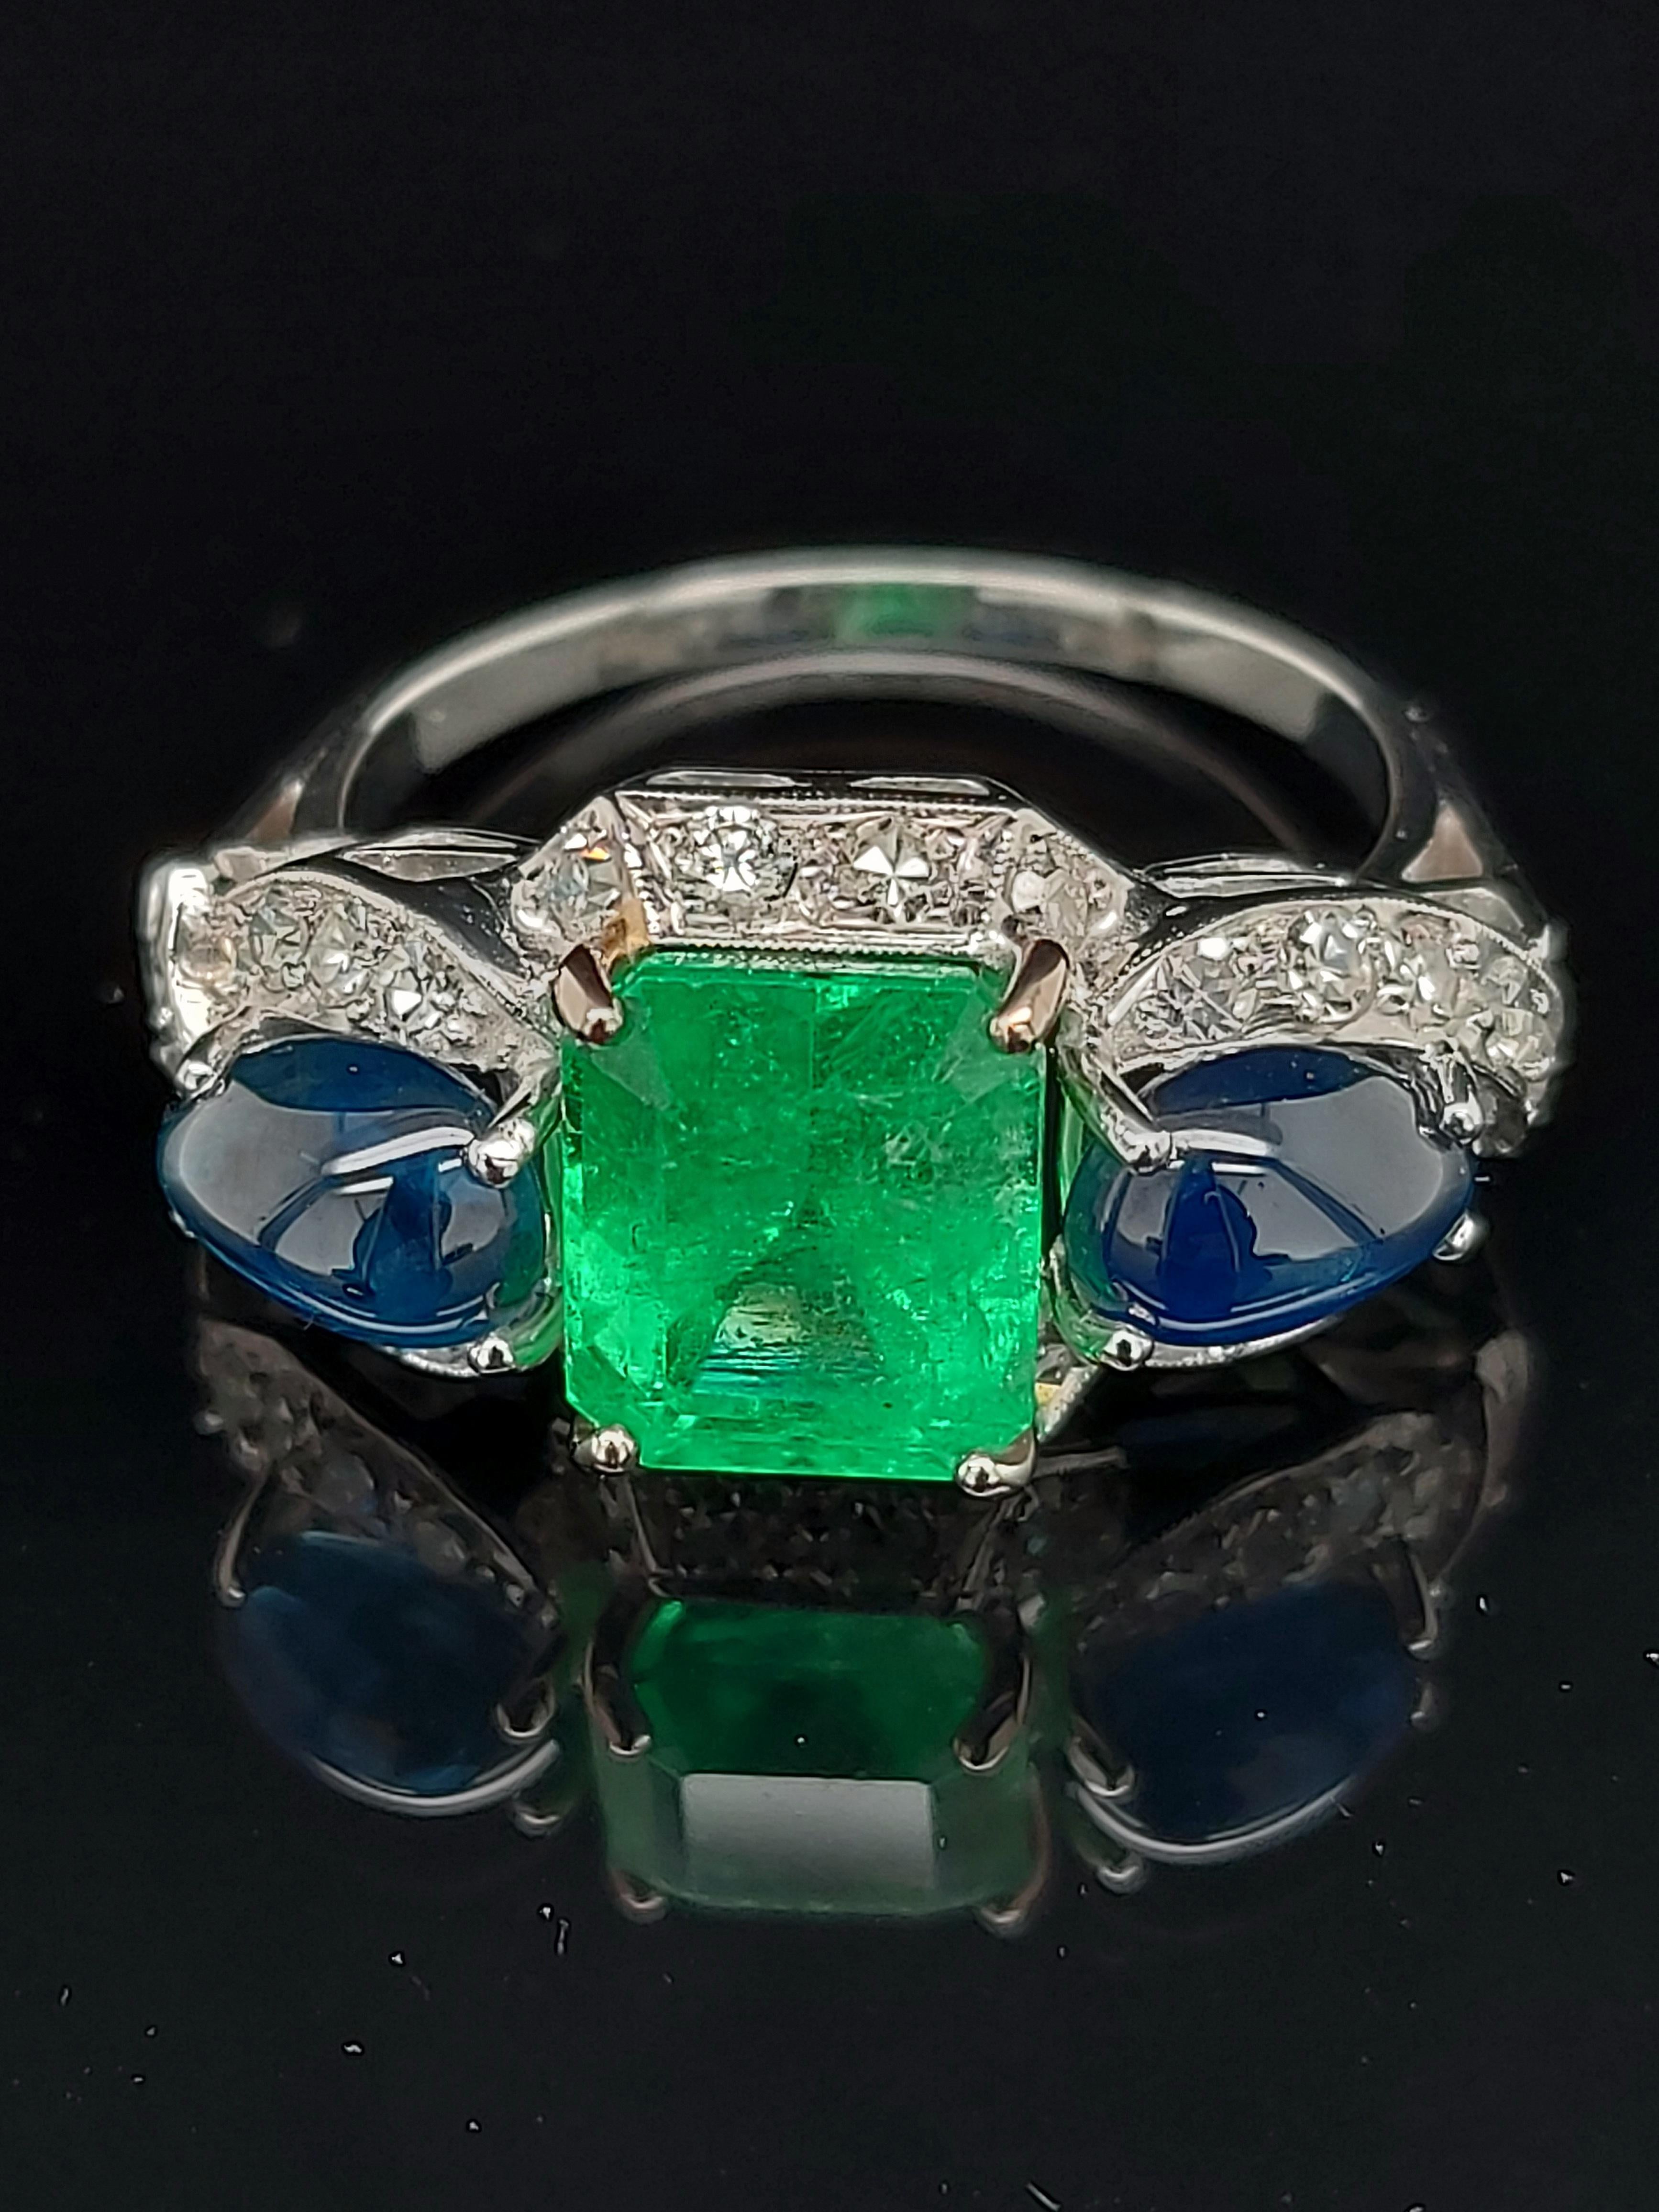 Unique art deco Platinum ring with colombian emerald, cabochon sapphires and diamonds 

Emerald: beautiful Columbian emerald, ca. 2.60 Cts

Sapphire: Cabochon sapphires of exceptional quality, together ca. 2.50 Cts

Diamonds: 26 diamonds 8/8 cut ,